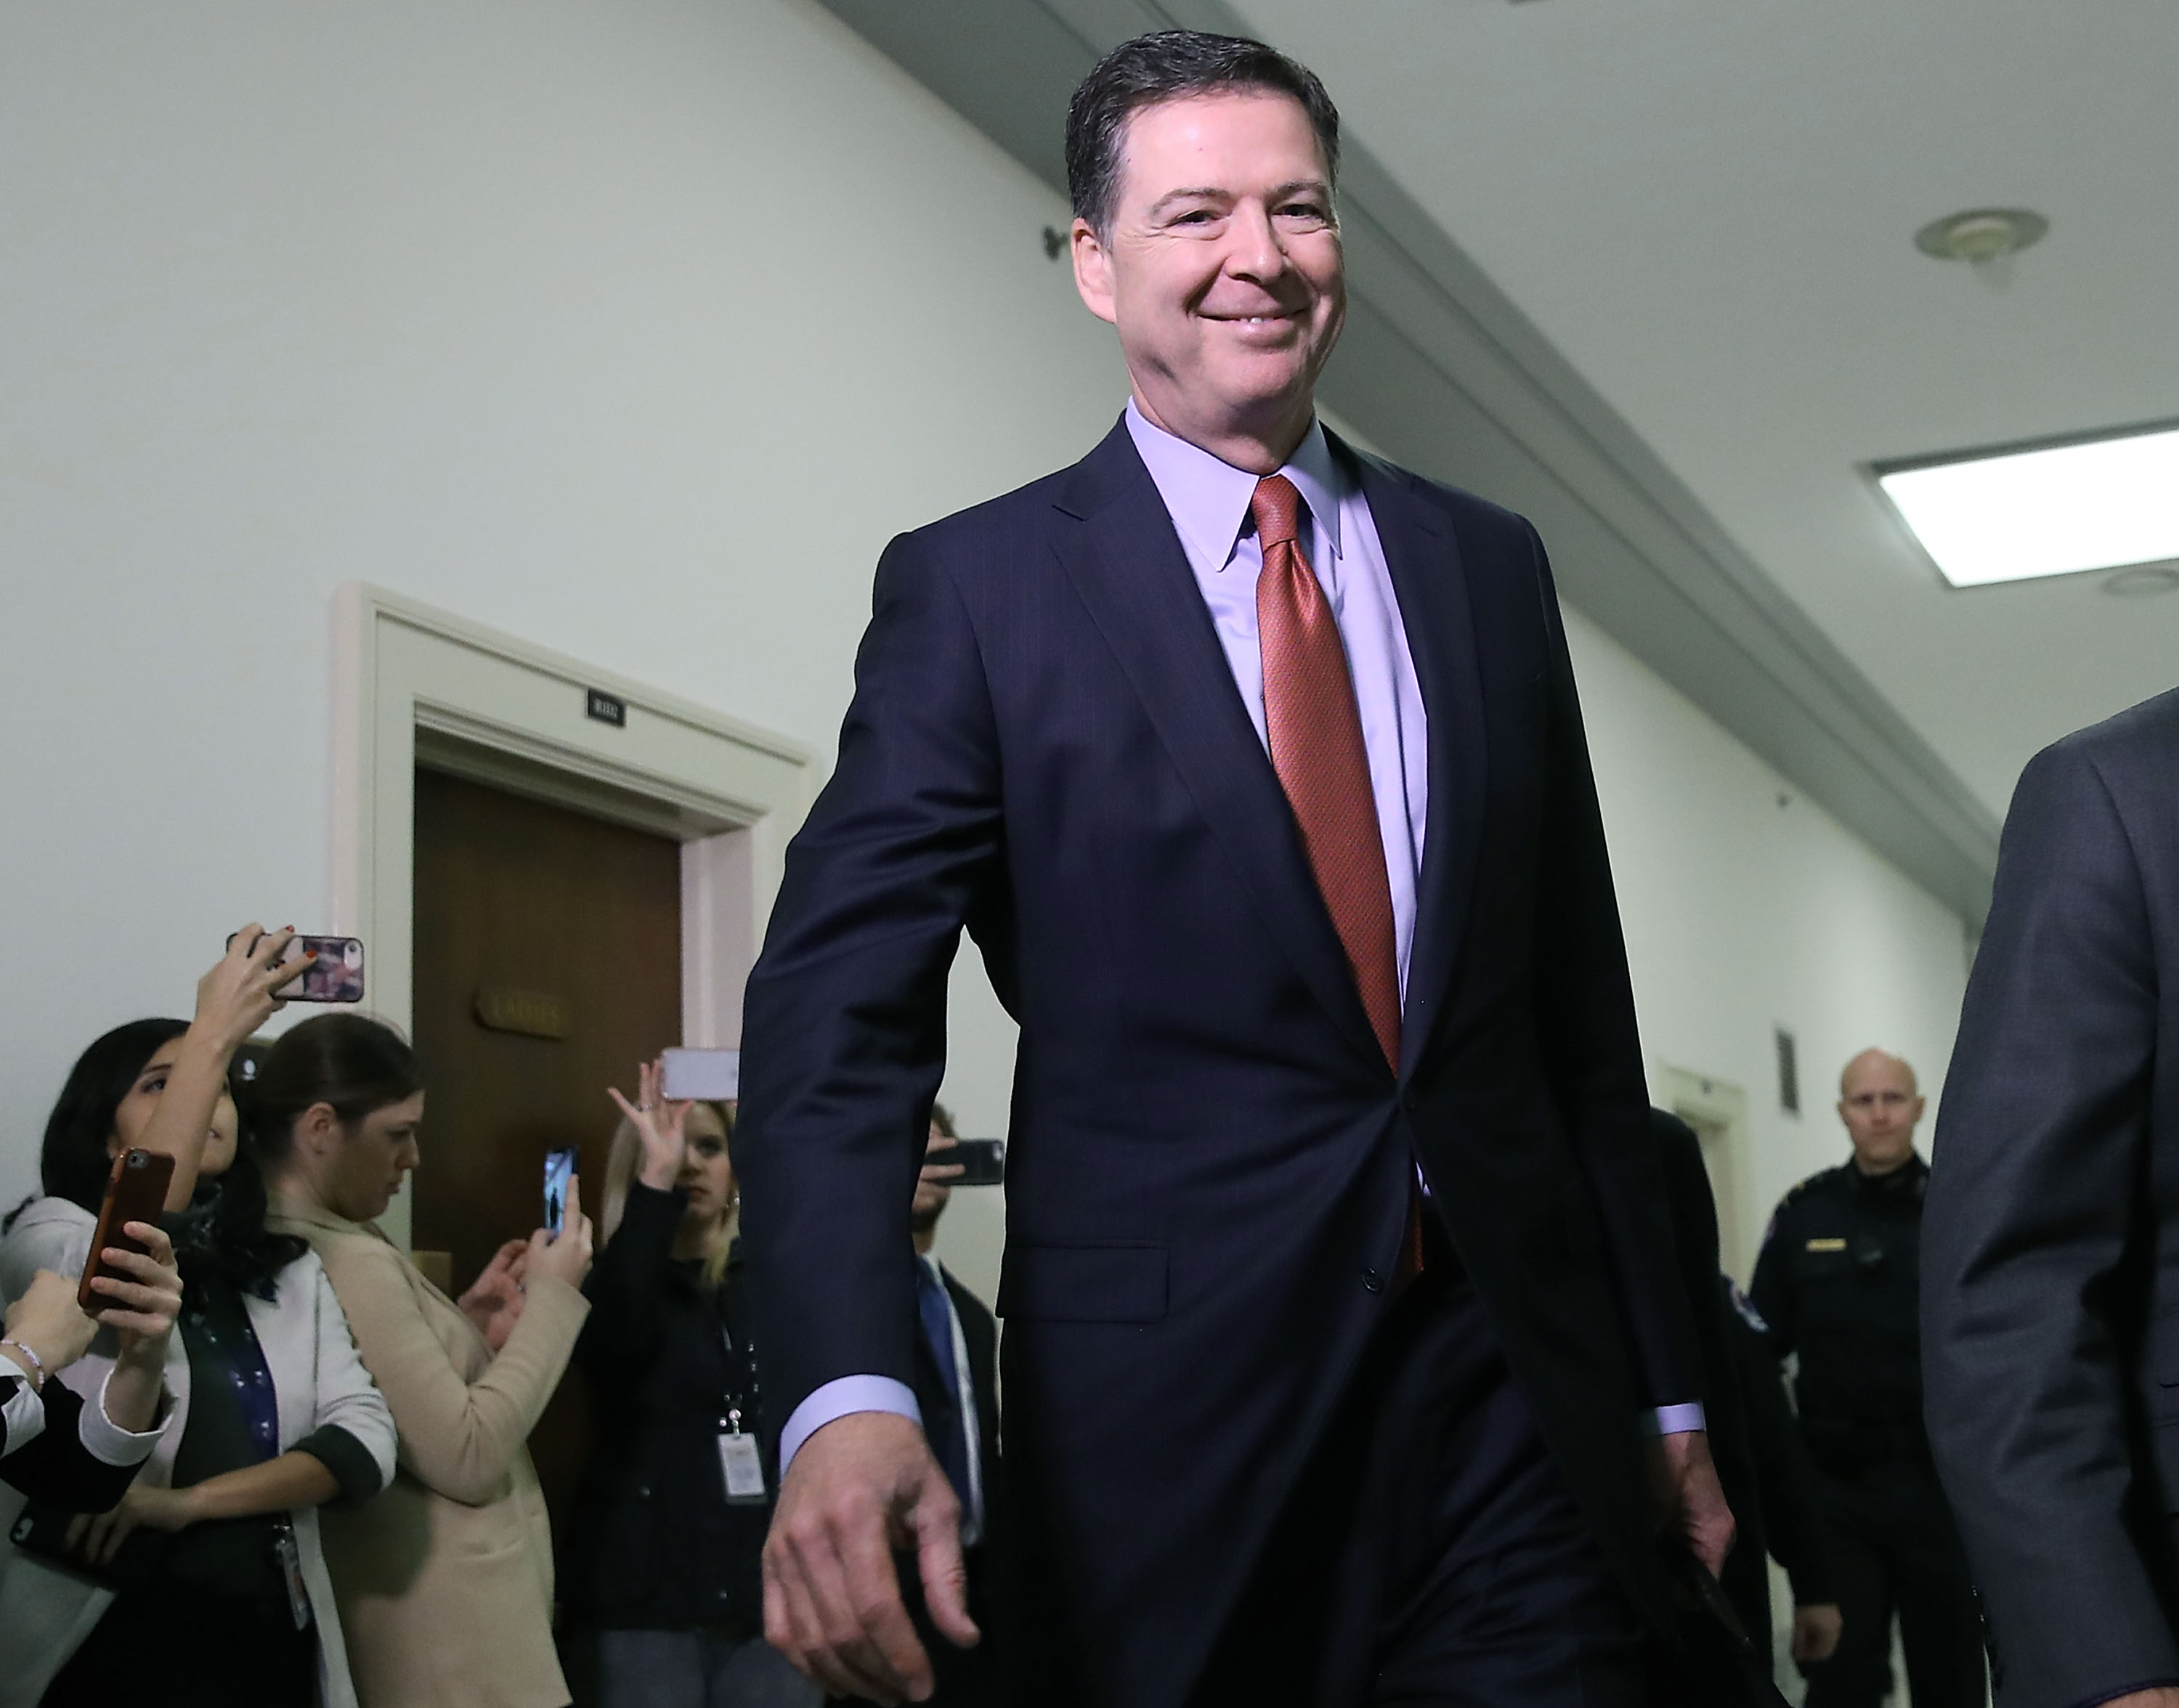 Former Federal Bureau of Investigation Director James Comey arrives at the Rayburn House Office Building before testifying to the House Judiciary and Oversight and Government Reform committees on Capitol Hill December 17, 2018 in Washington, DC. (Photo by Mark Wilson/Getty Images)